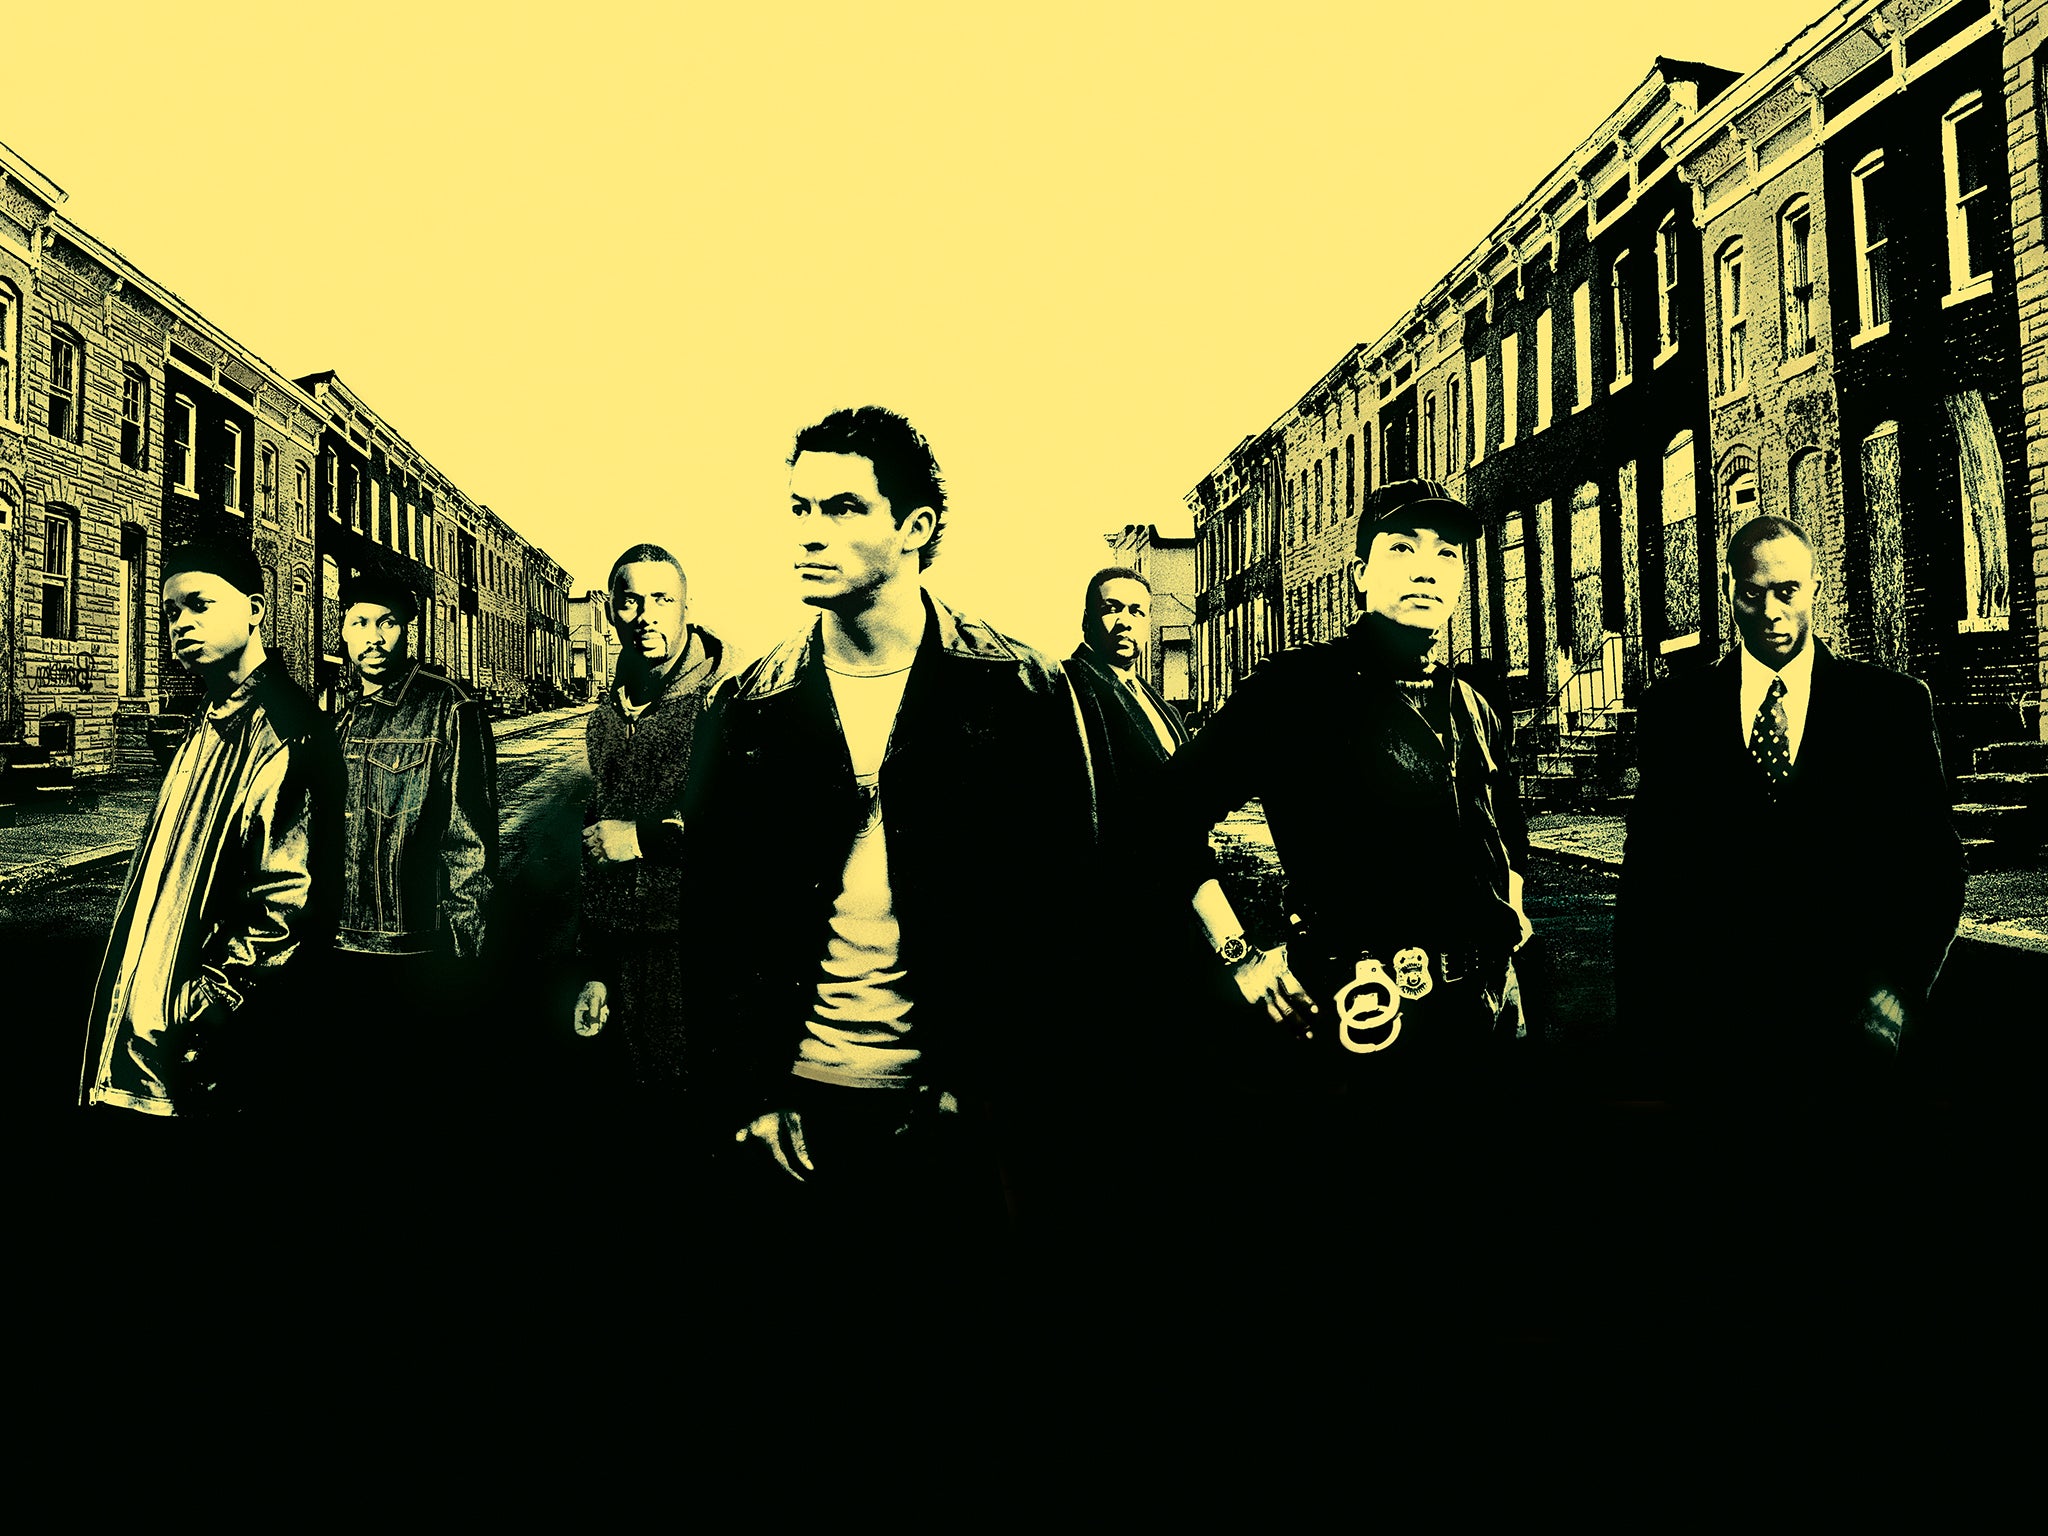 An American fable: the cast of ‘The Wire’, in promotional artwork for the show’s second season